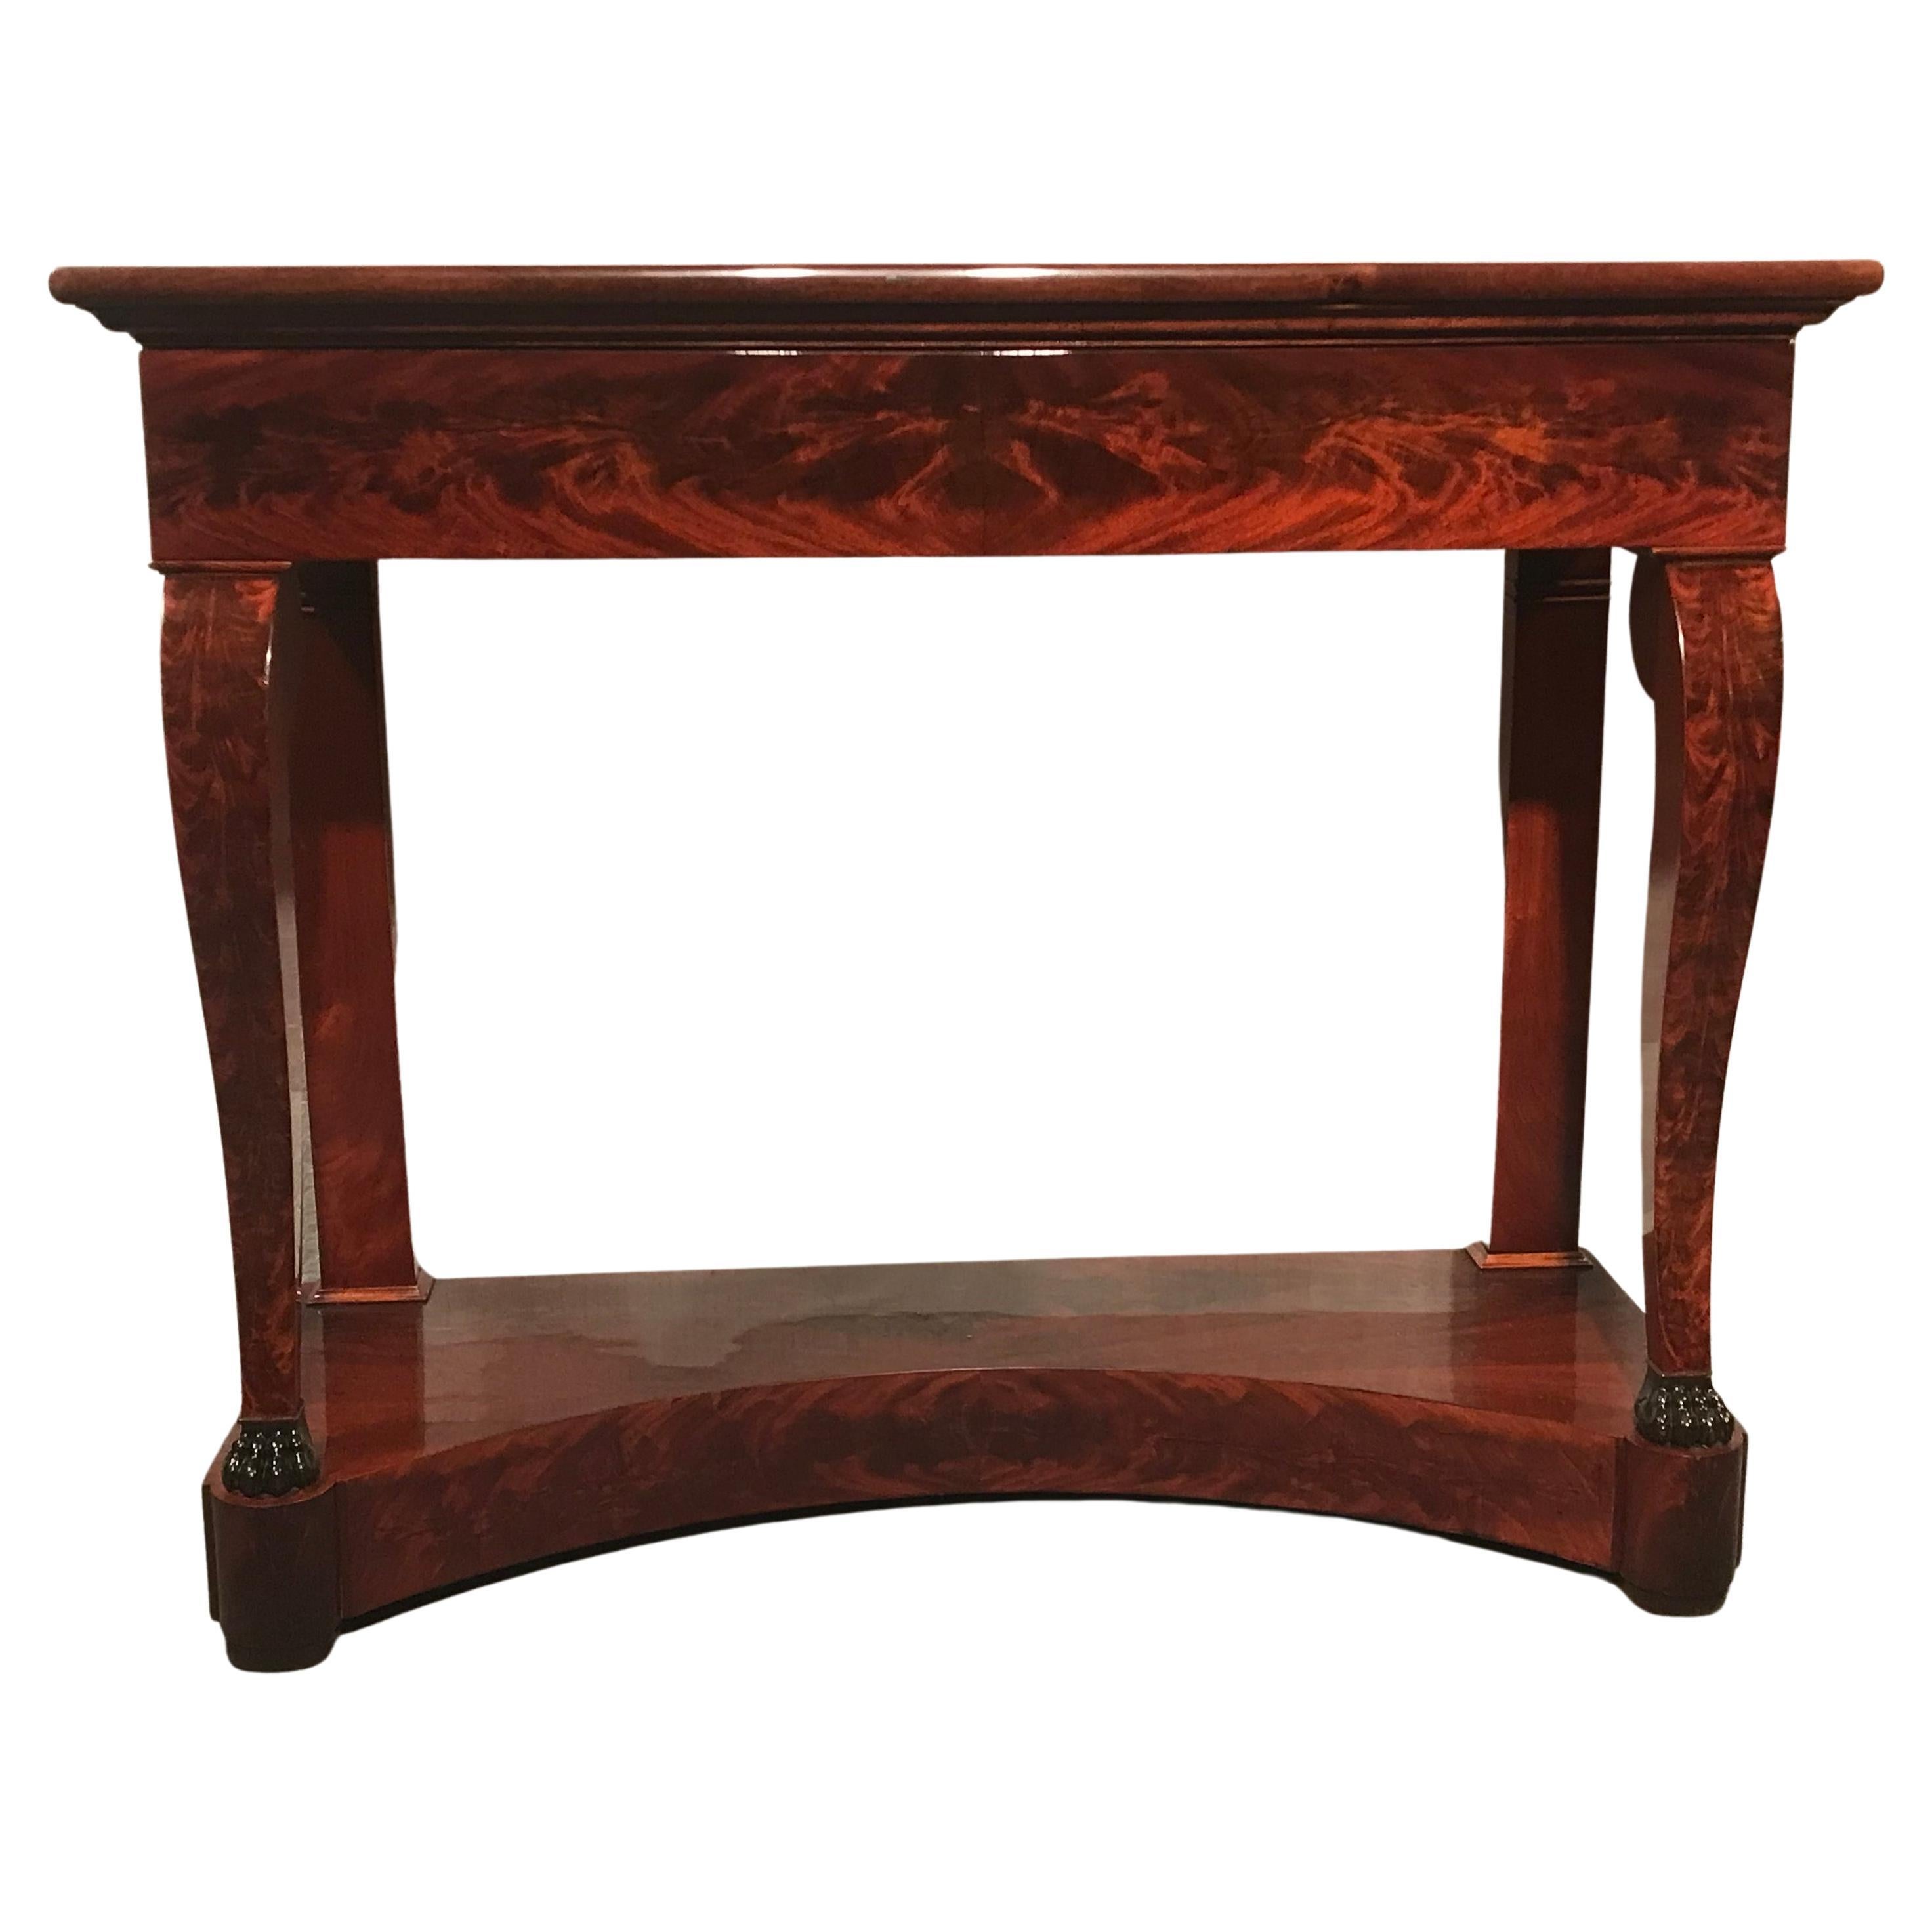 This elegant yet unpretentious French antique console table of the 19th century is a typical example of the French Restoration period. This was the period following the reign of Napoleon.
The console table has in-curving square-section legs with